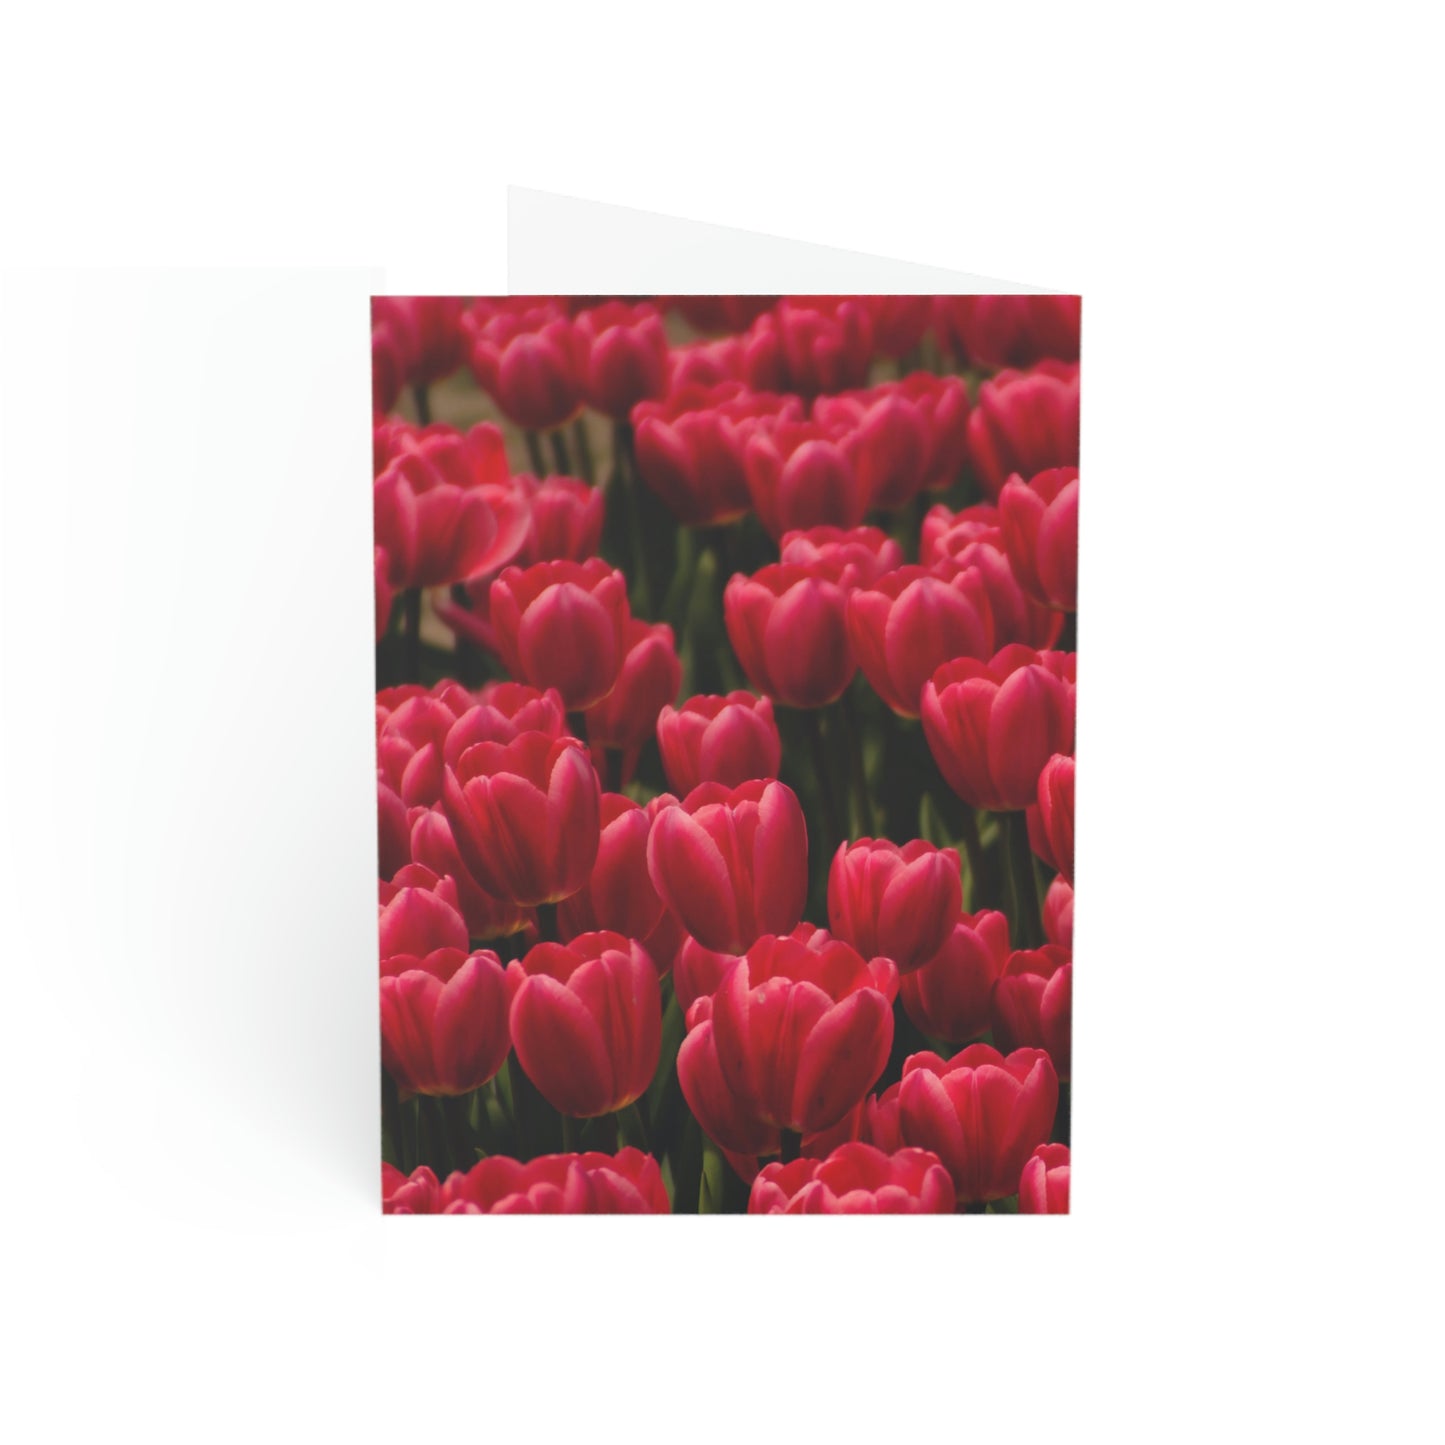 Flowers 16 Greeting Cards (1, 10, 30, and 50pcs)